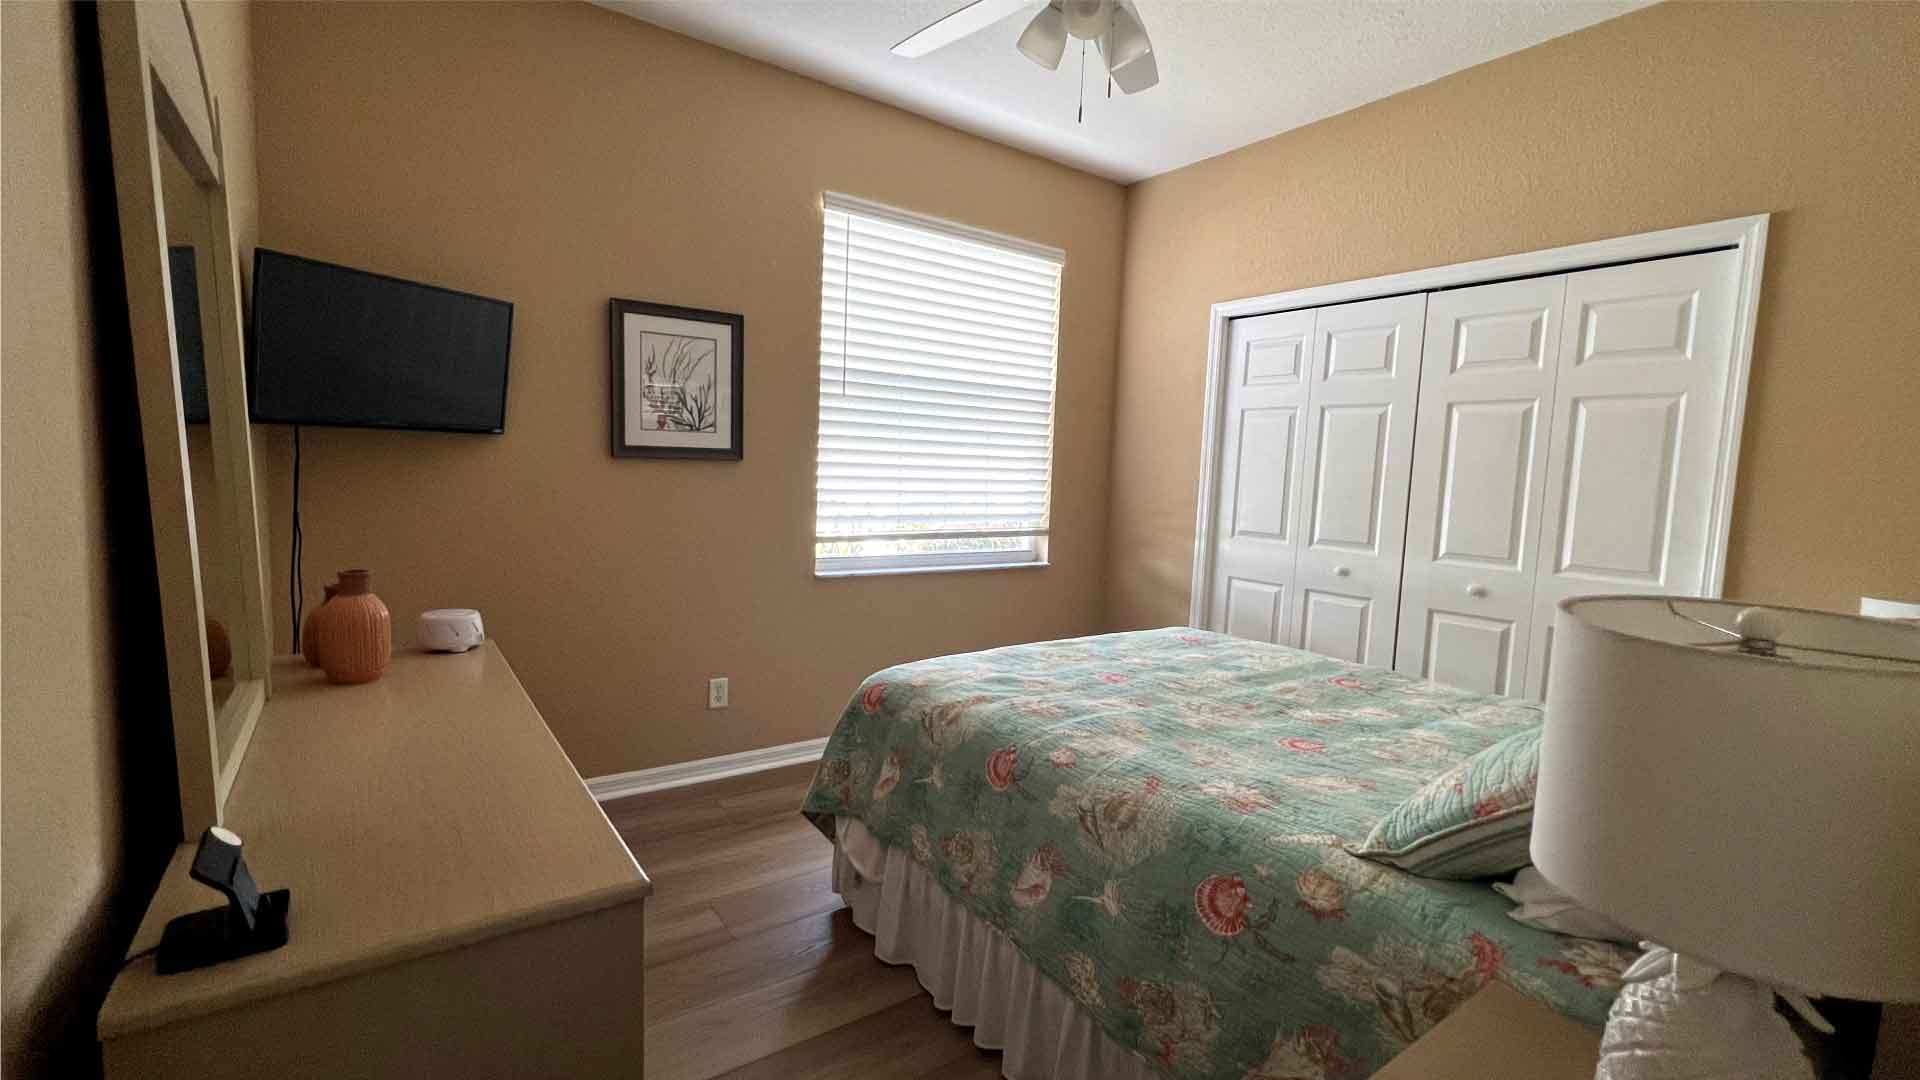 Bedroom cleaning - Deep cleaning in Cape Coral by Goldmillio - Feb 19